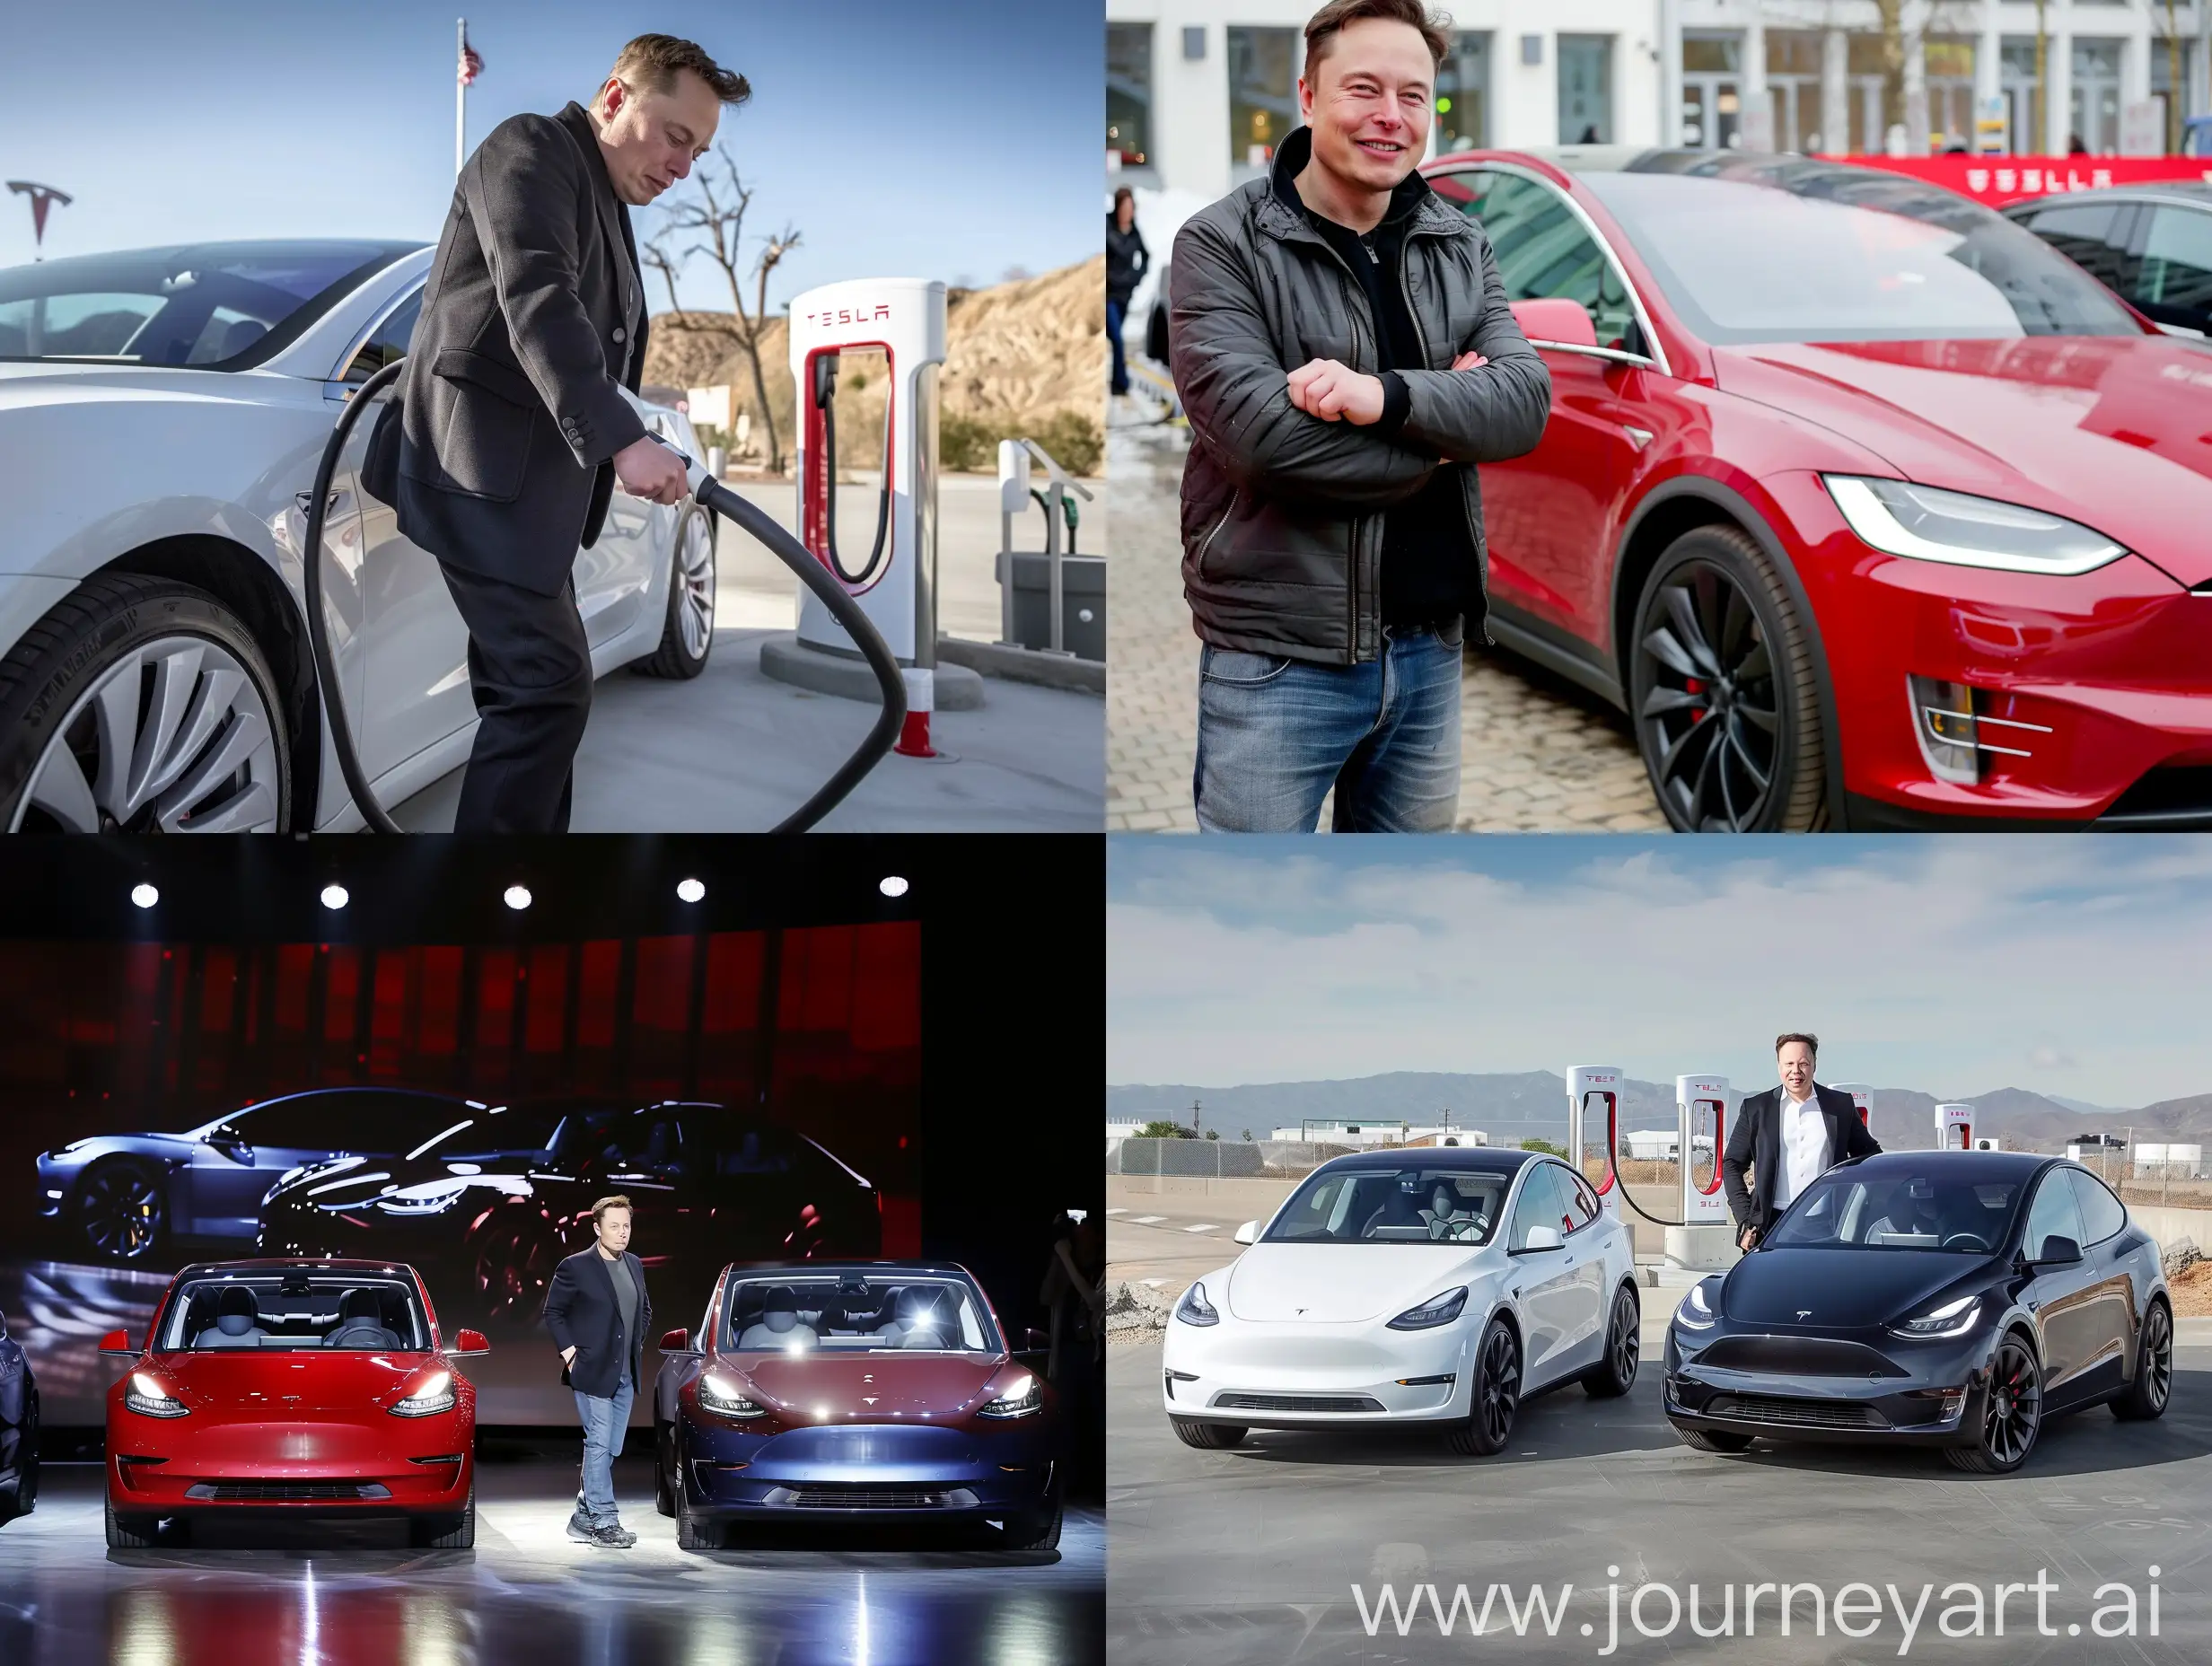 Elon-Musk-Advertising-Gasoline-Cars-with-V6-Engine-in-43-Aspect-Ratio